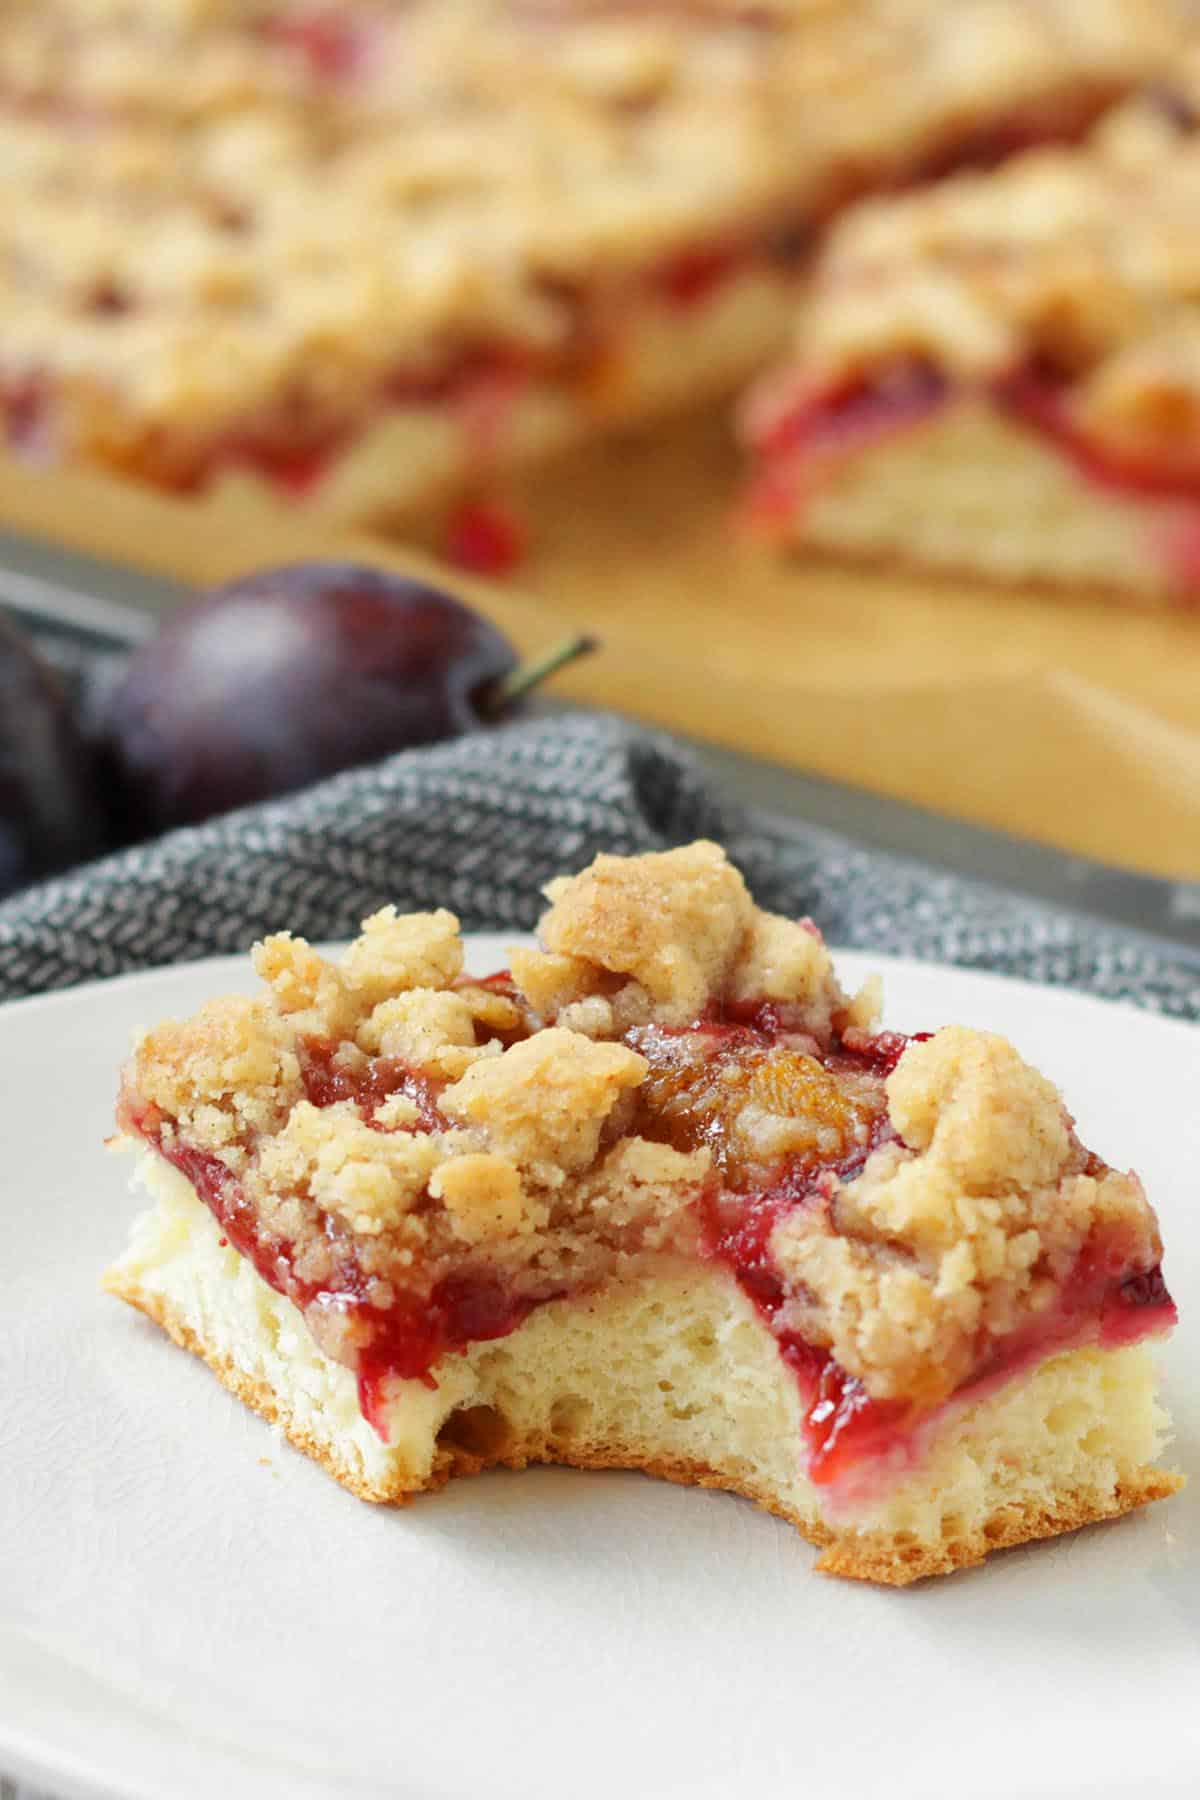 21 Plum Recipes That You Can Make At Home - Minneopa Orchards